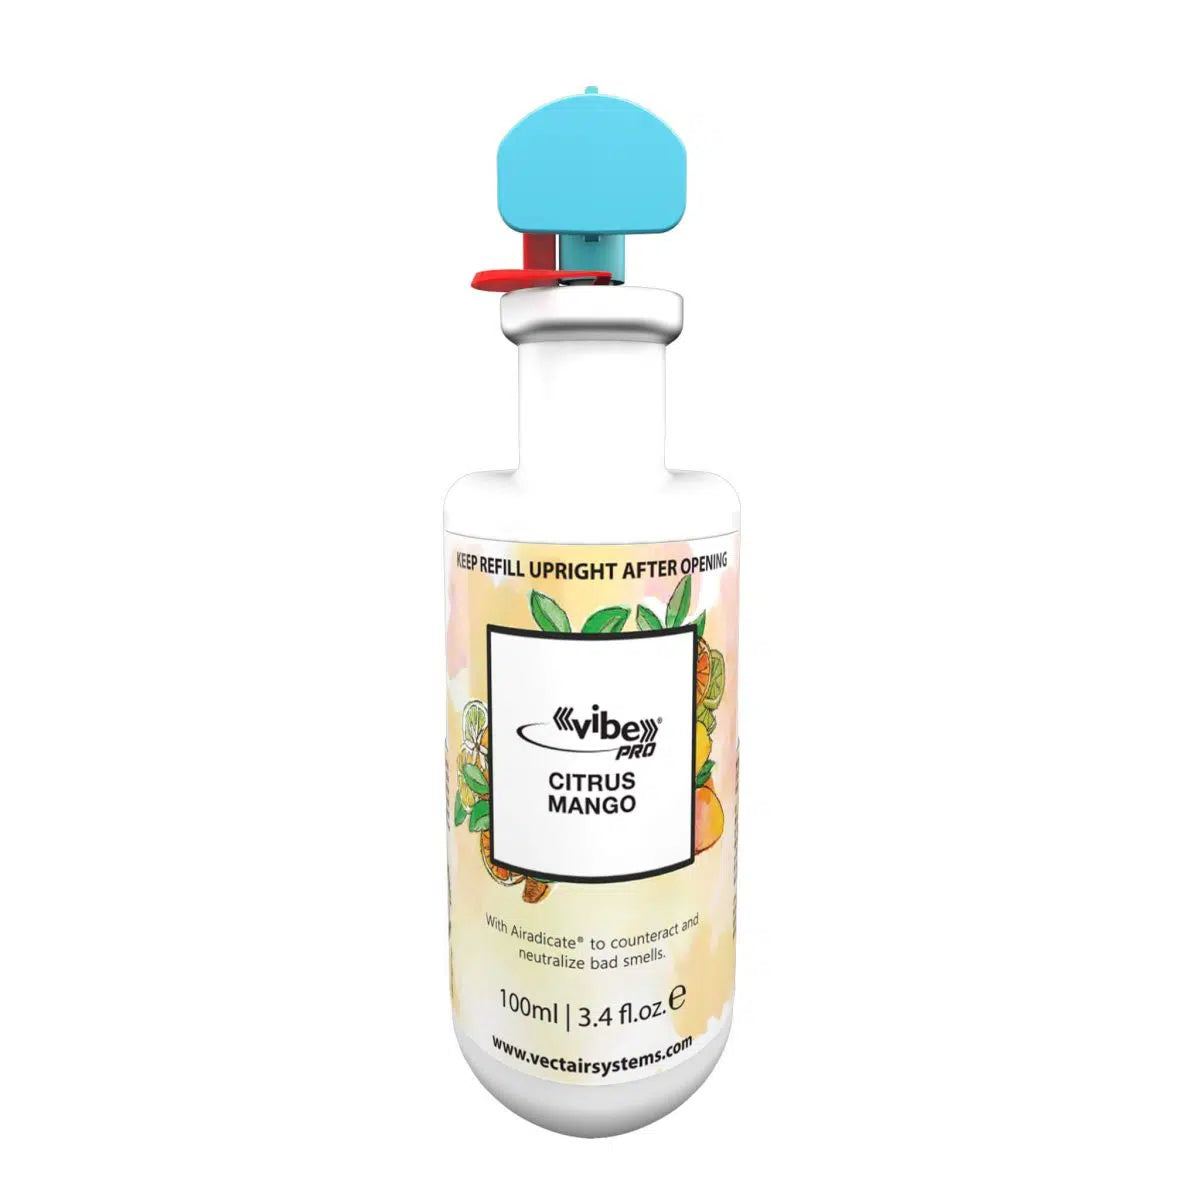 The Citrus Mango fragrance consists of a fruity cocktail of citrus, mango, and berries with punches of lime, peaches and vanilla. The fragrance is subtly finished with a kick of mango musk.